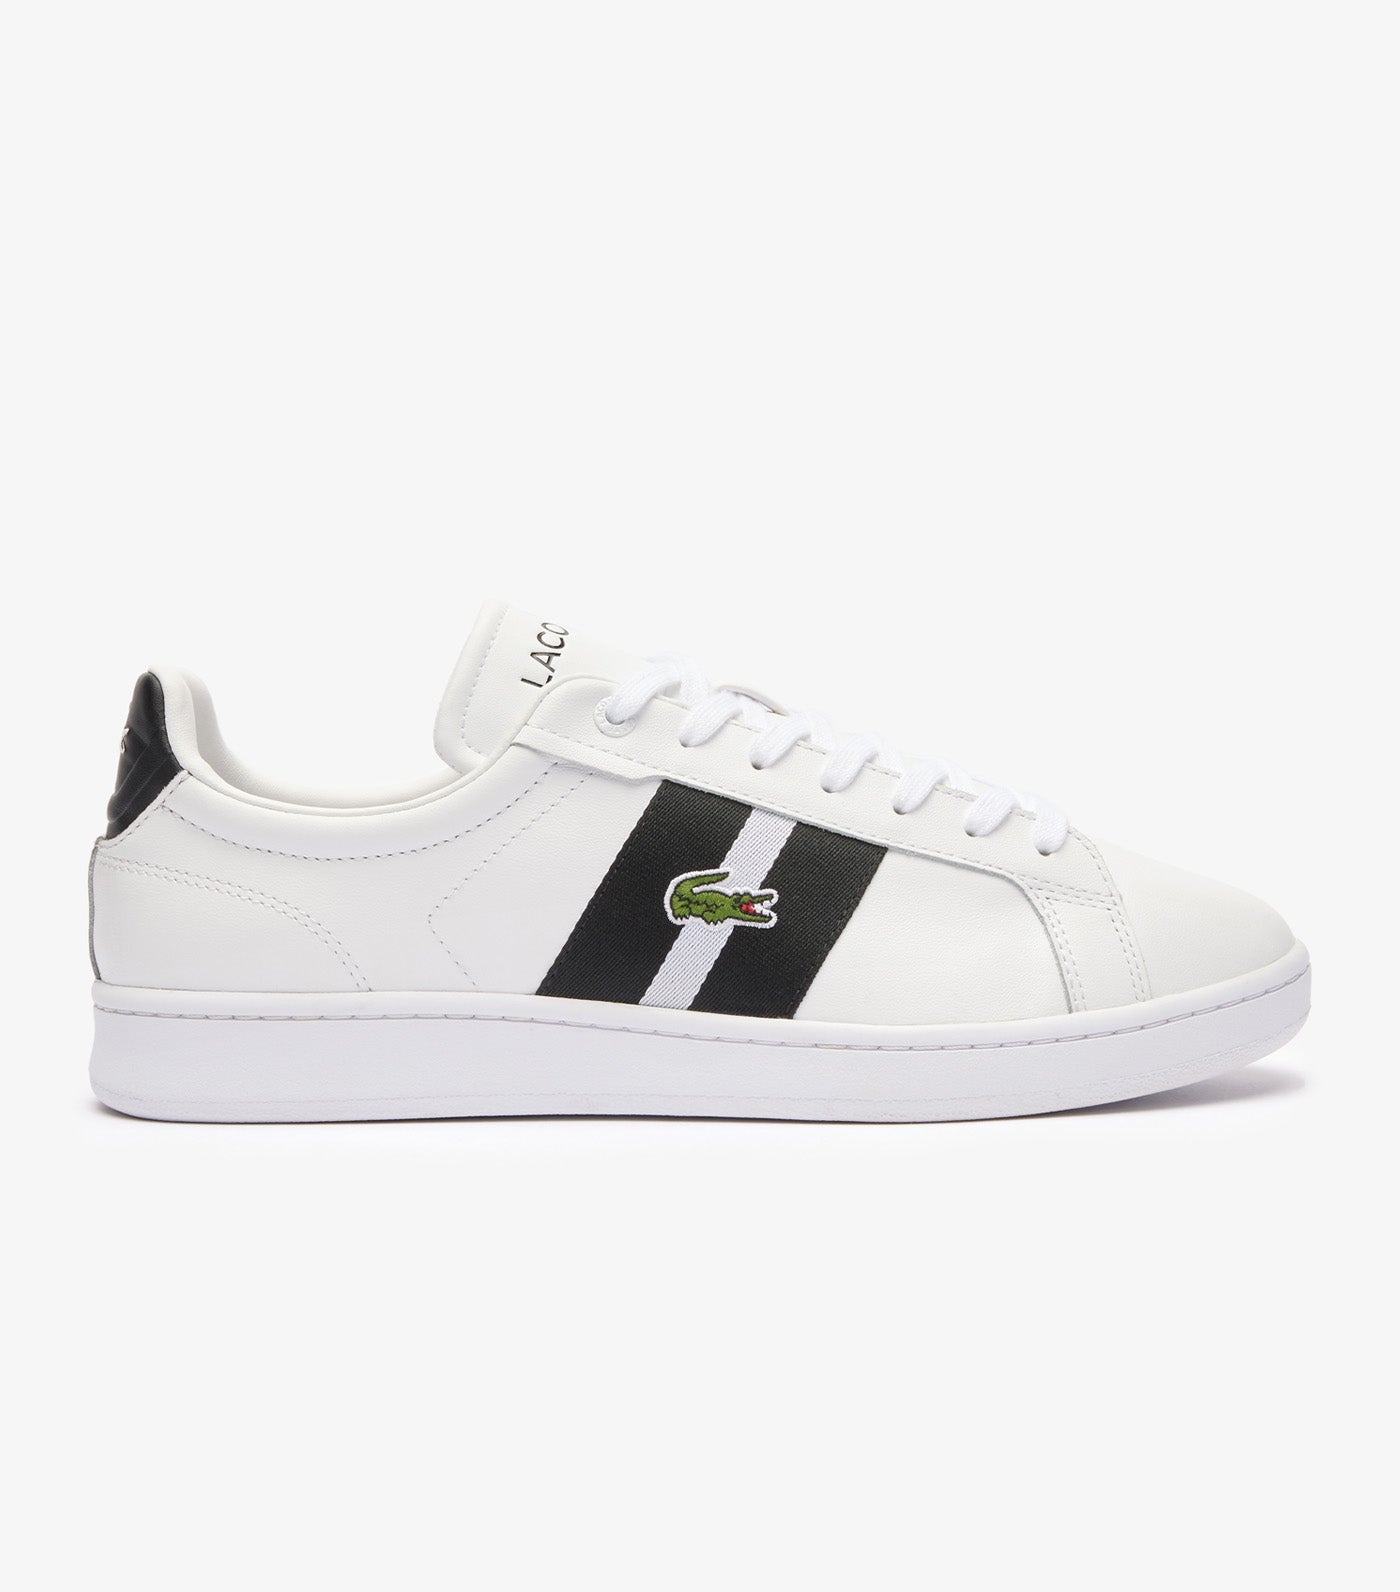 Men's Carnaby Pro CGR Bar Leather Trainers White/Black